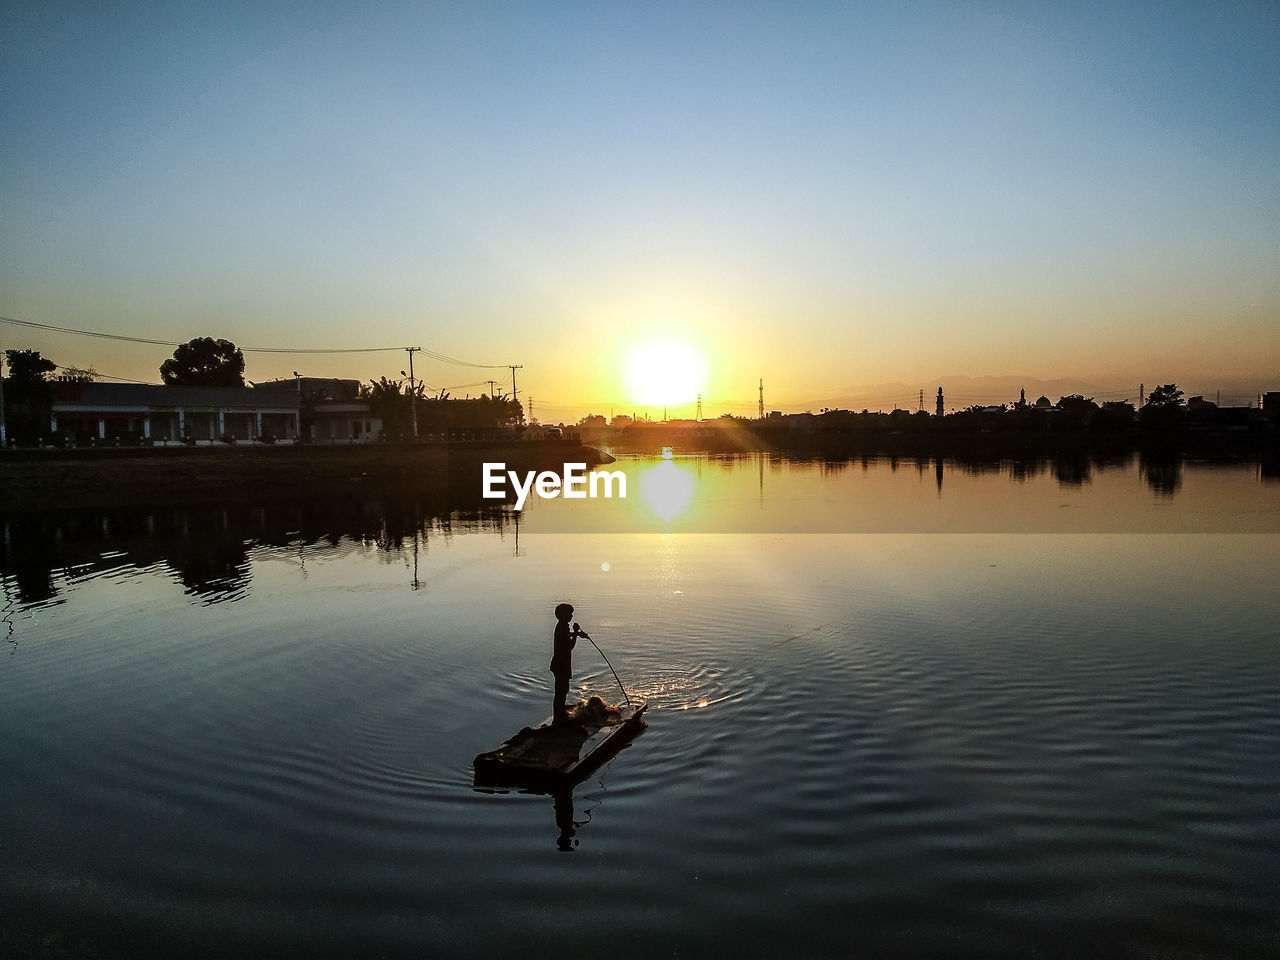 Silhouette man in wooden raft in lake against sky during sunset